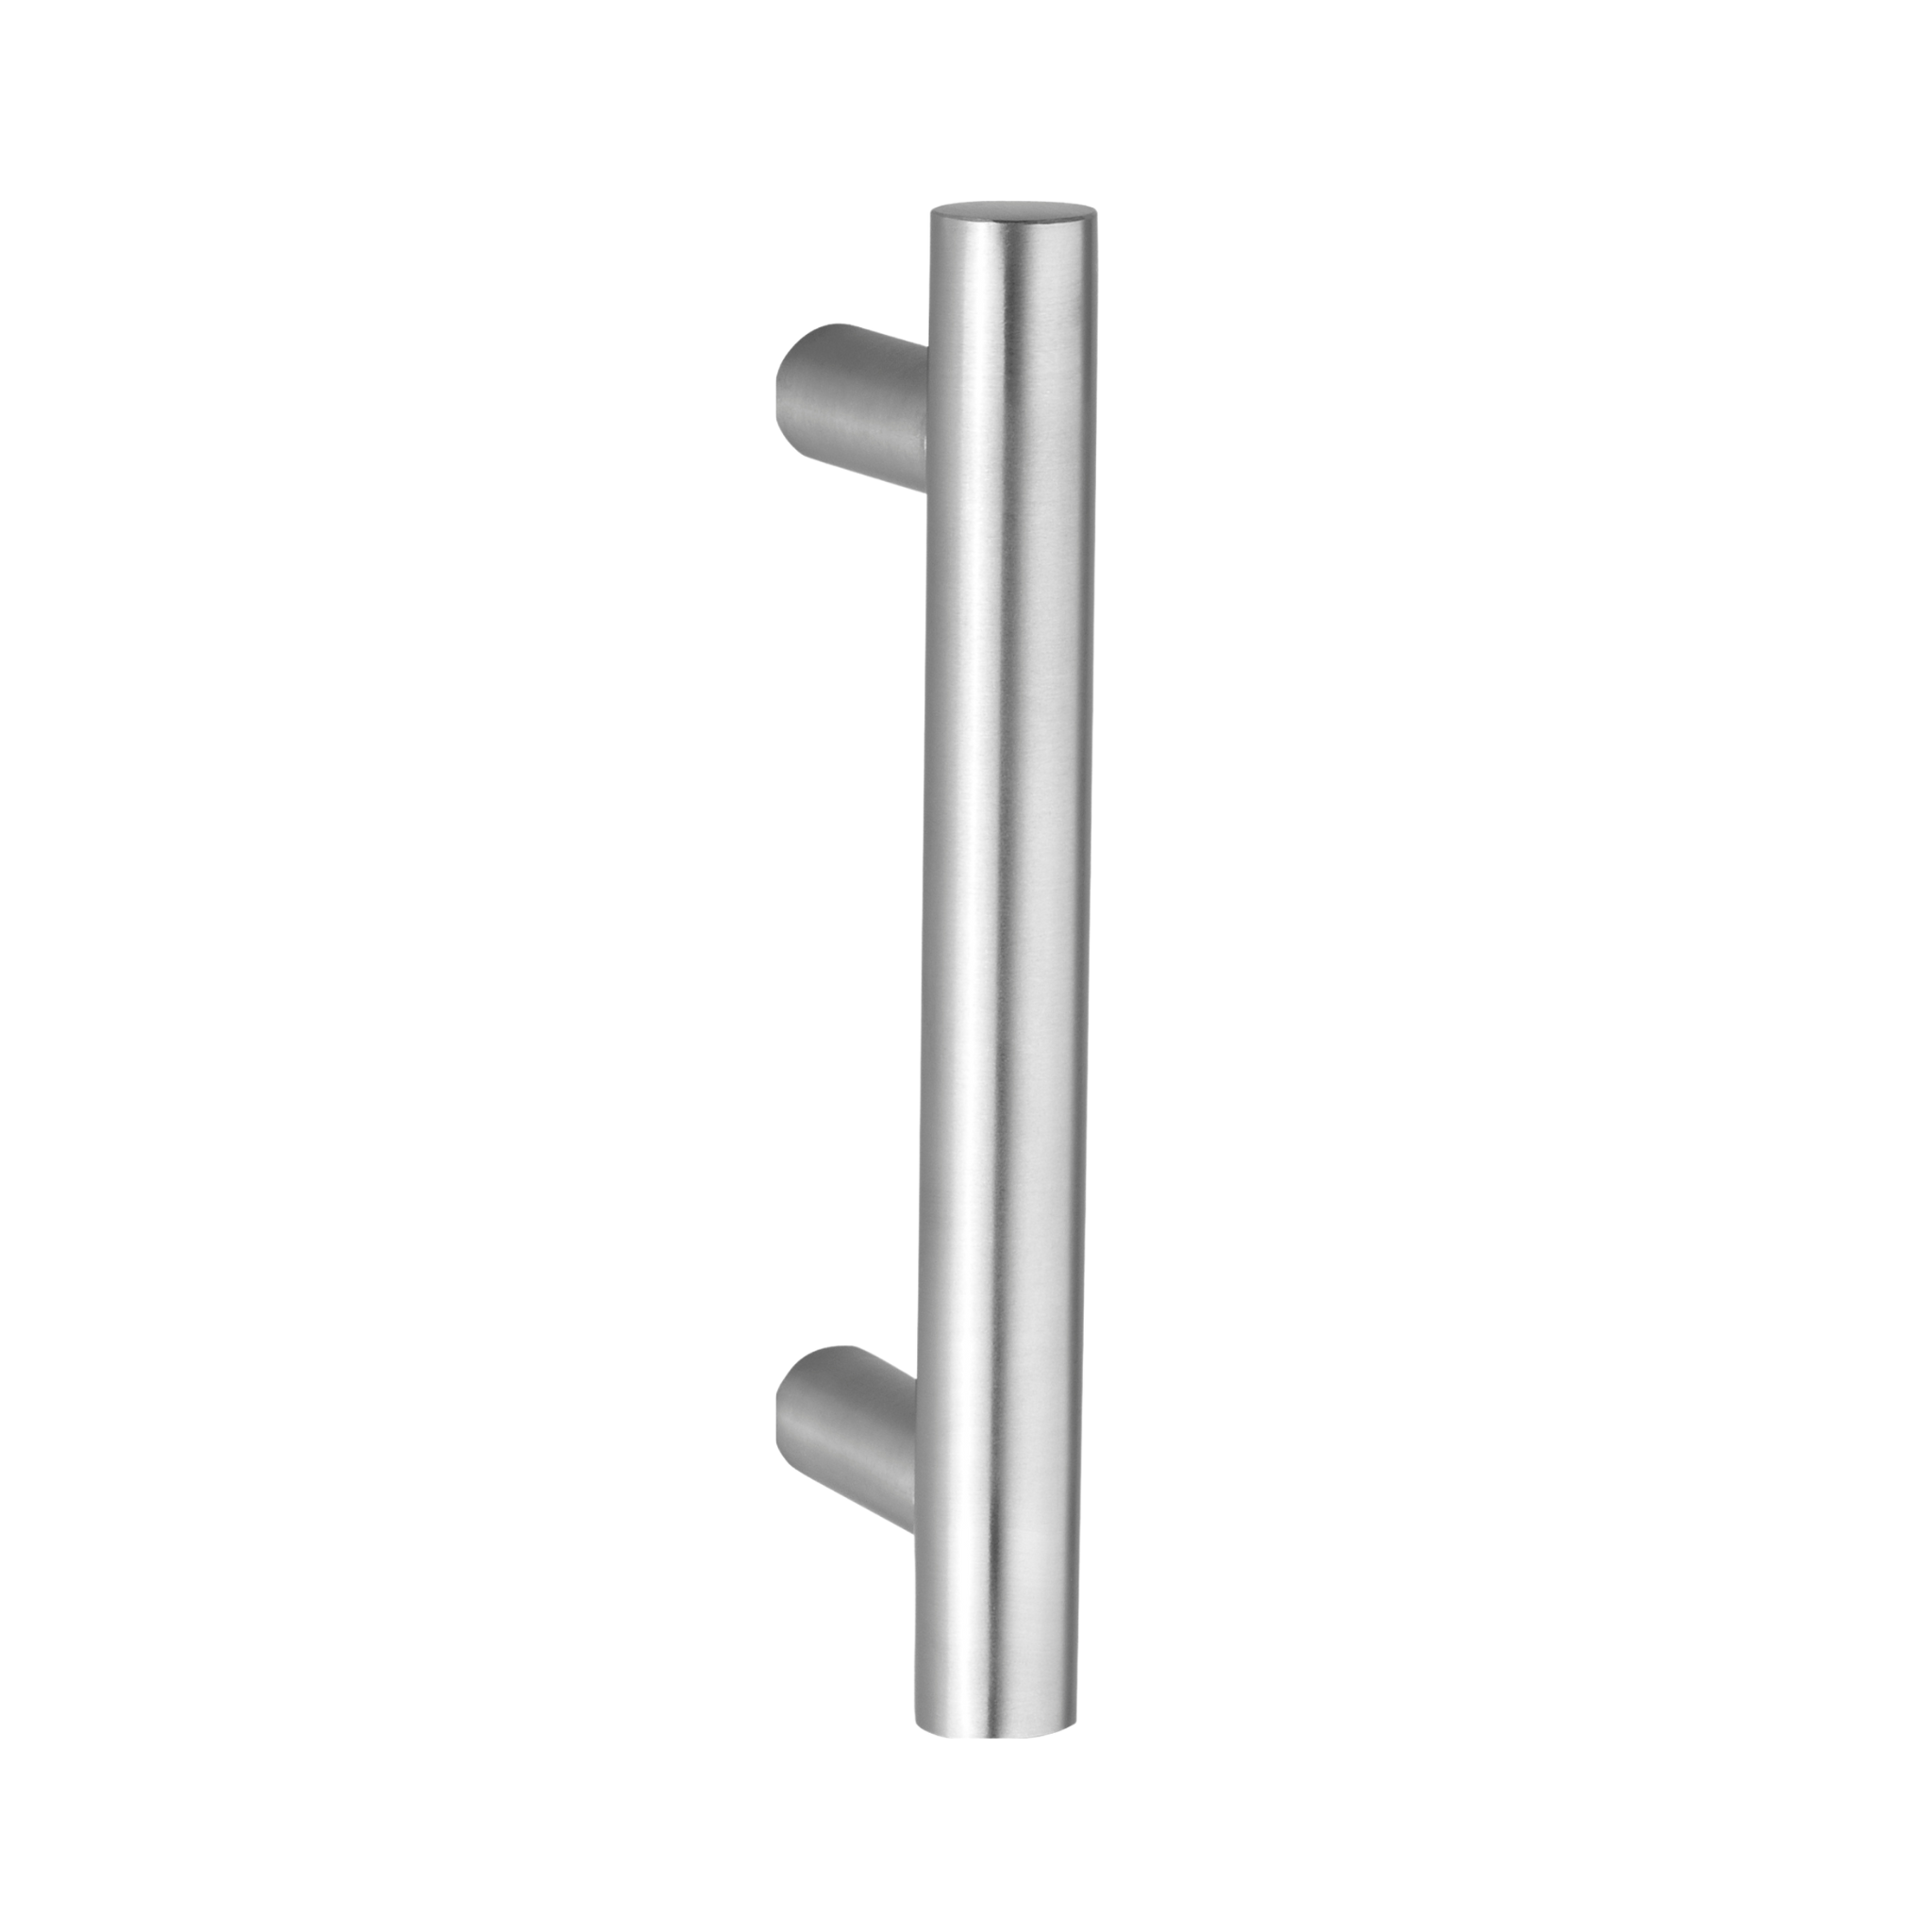 FP.T04.BTF.TR, Pull Handle, Tubular, T Handle, BoltThru, 32mm (Ø) x 500mm (l) x 380mm (ctc), Stainless Steel with Tarnish Resistant, CISA